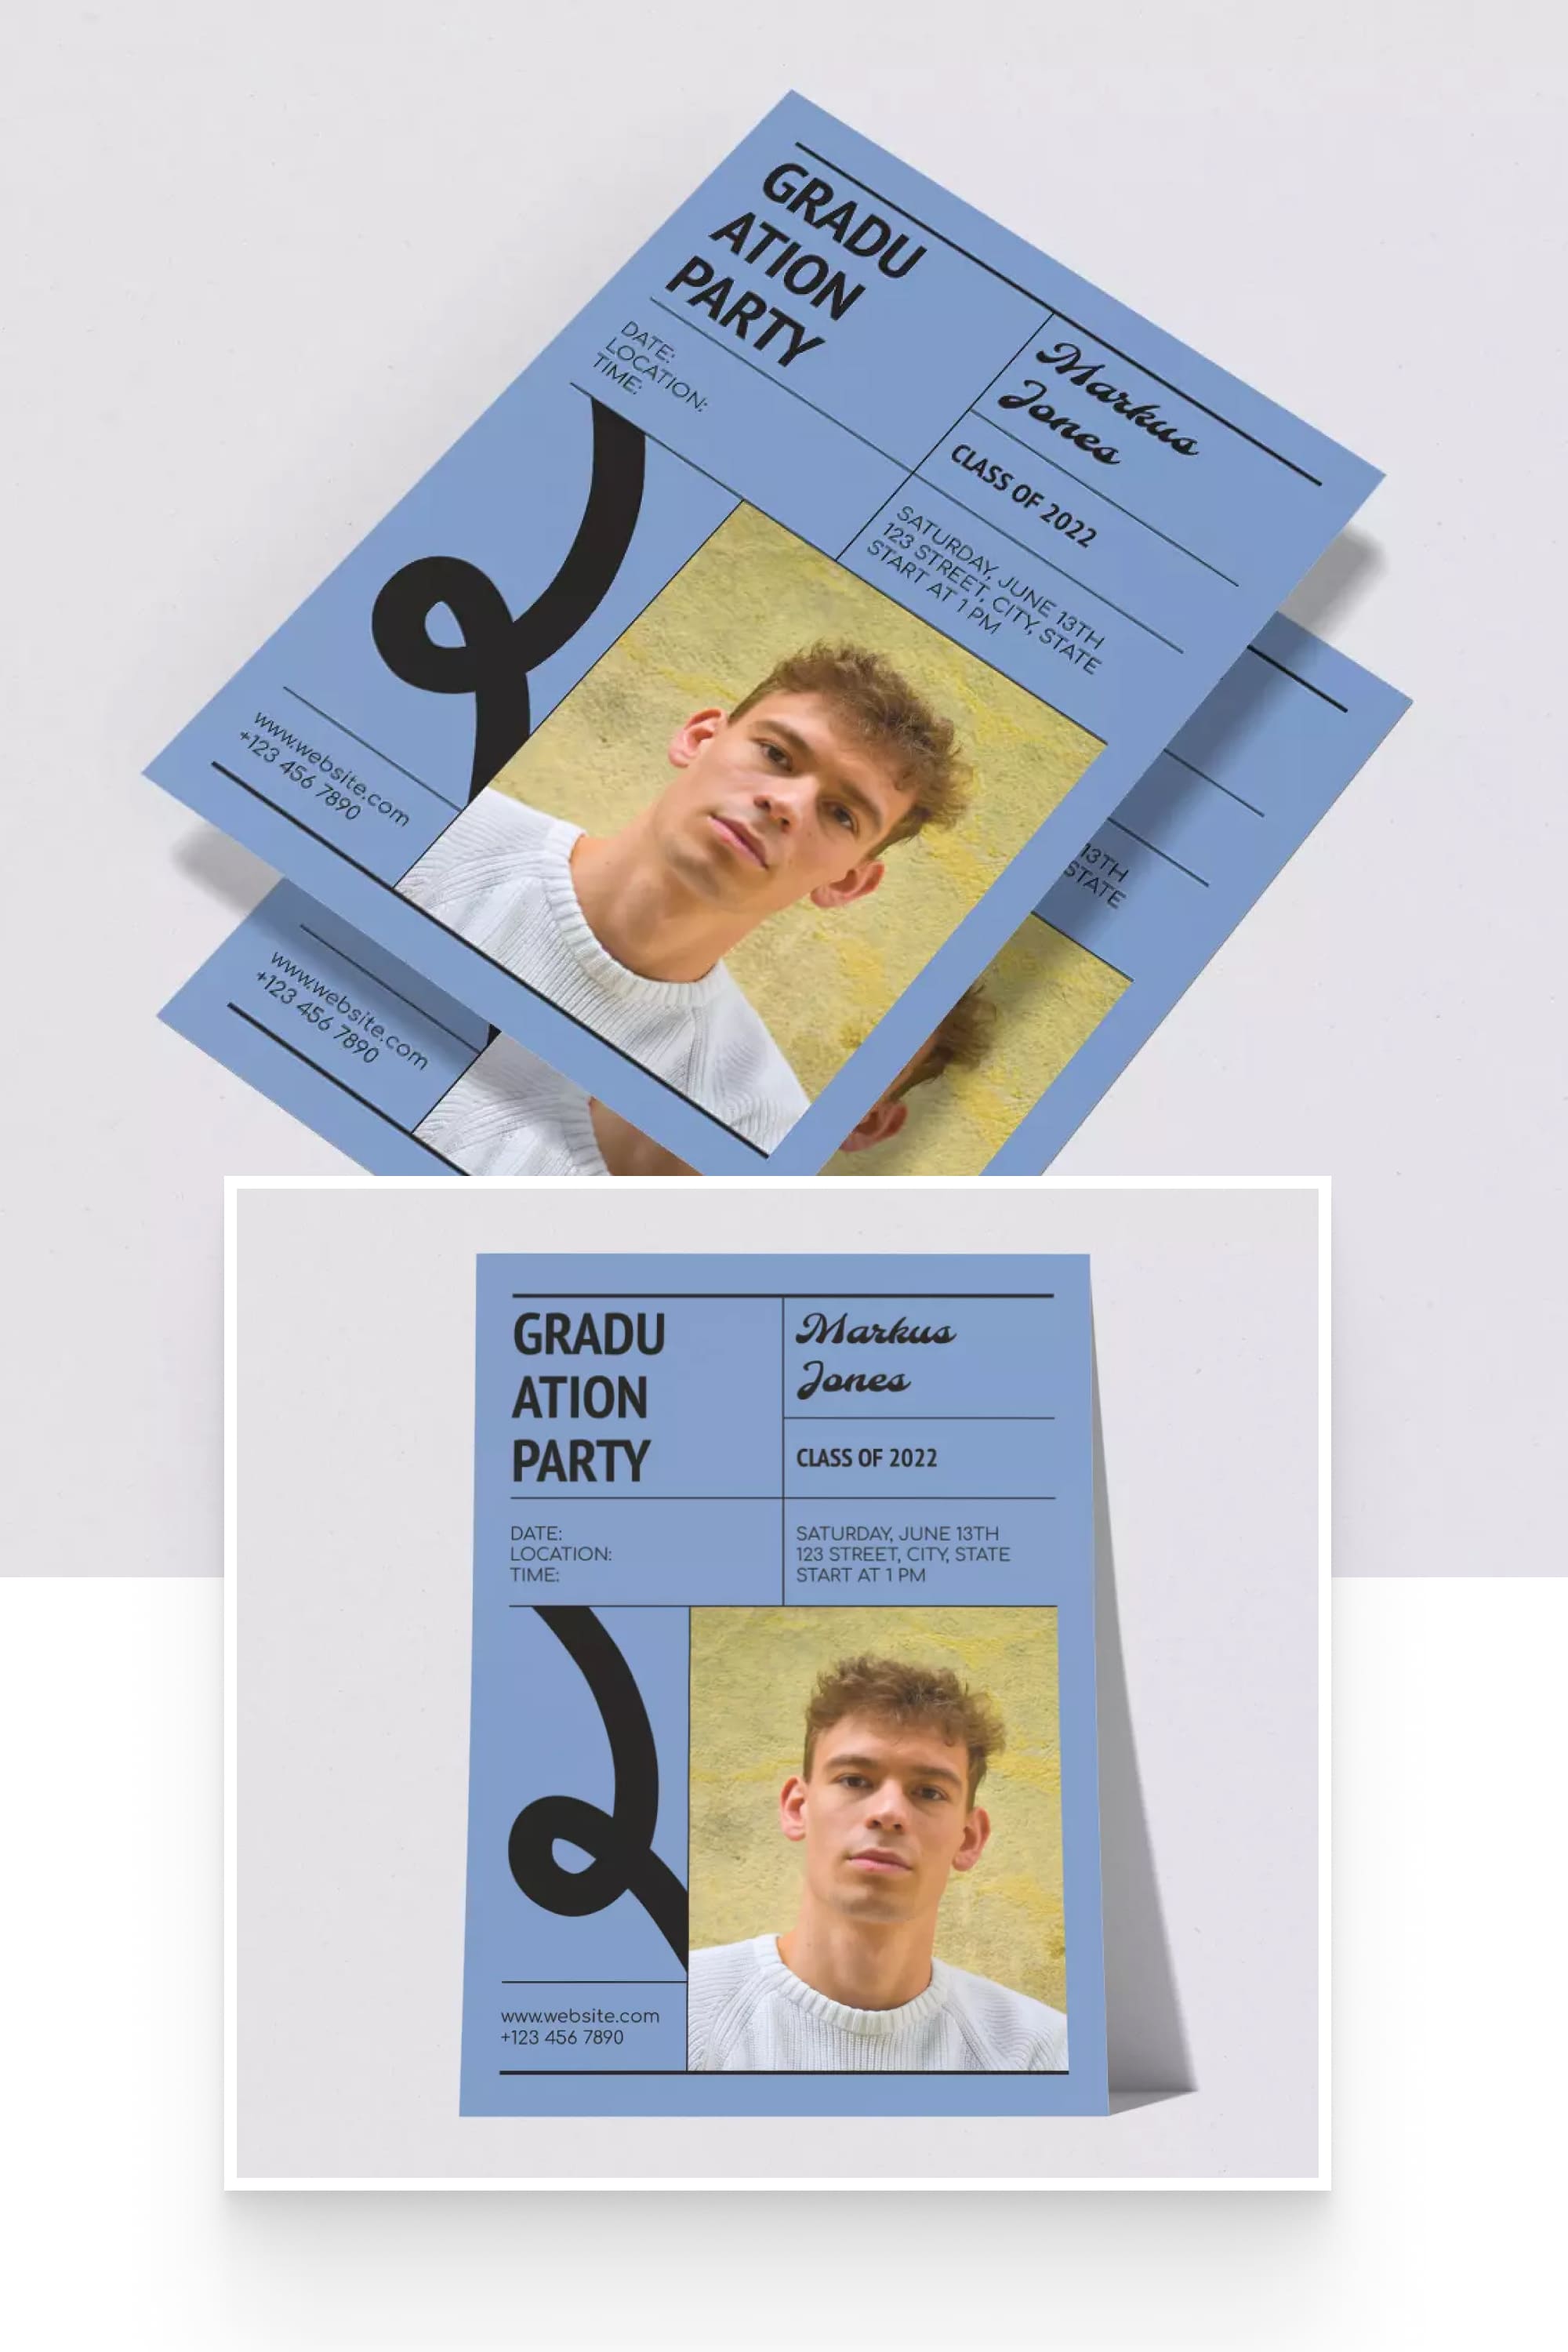 A collage of images of graduation invitations with a photo of a student.